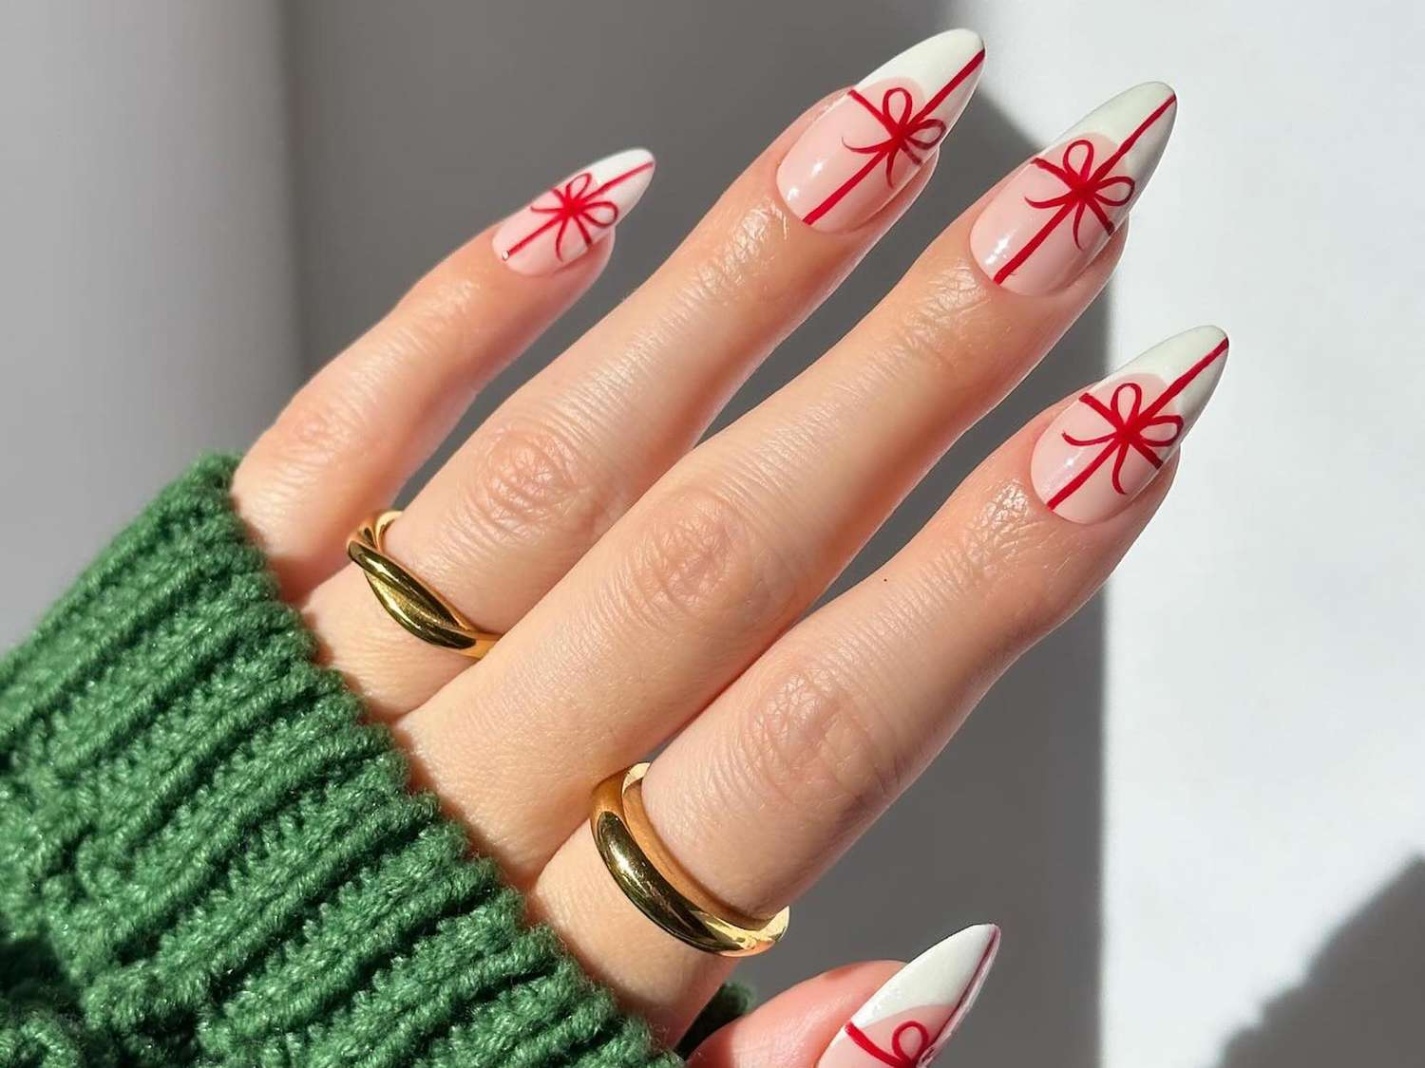 Get Festive With Fun And Fabulous Nail Designs For Christmas!